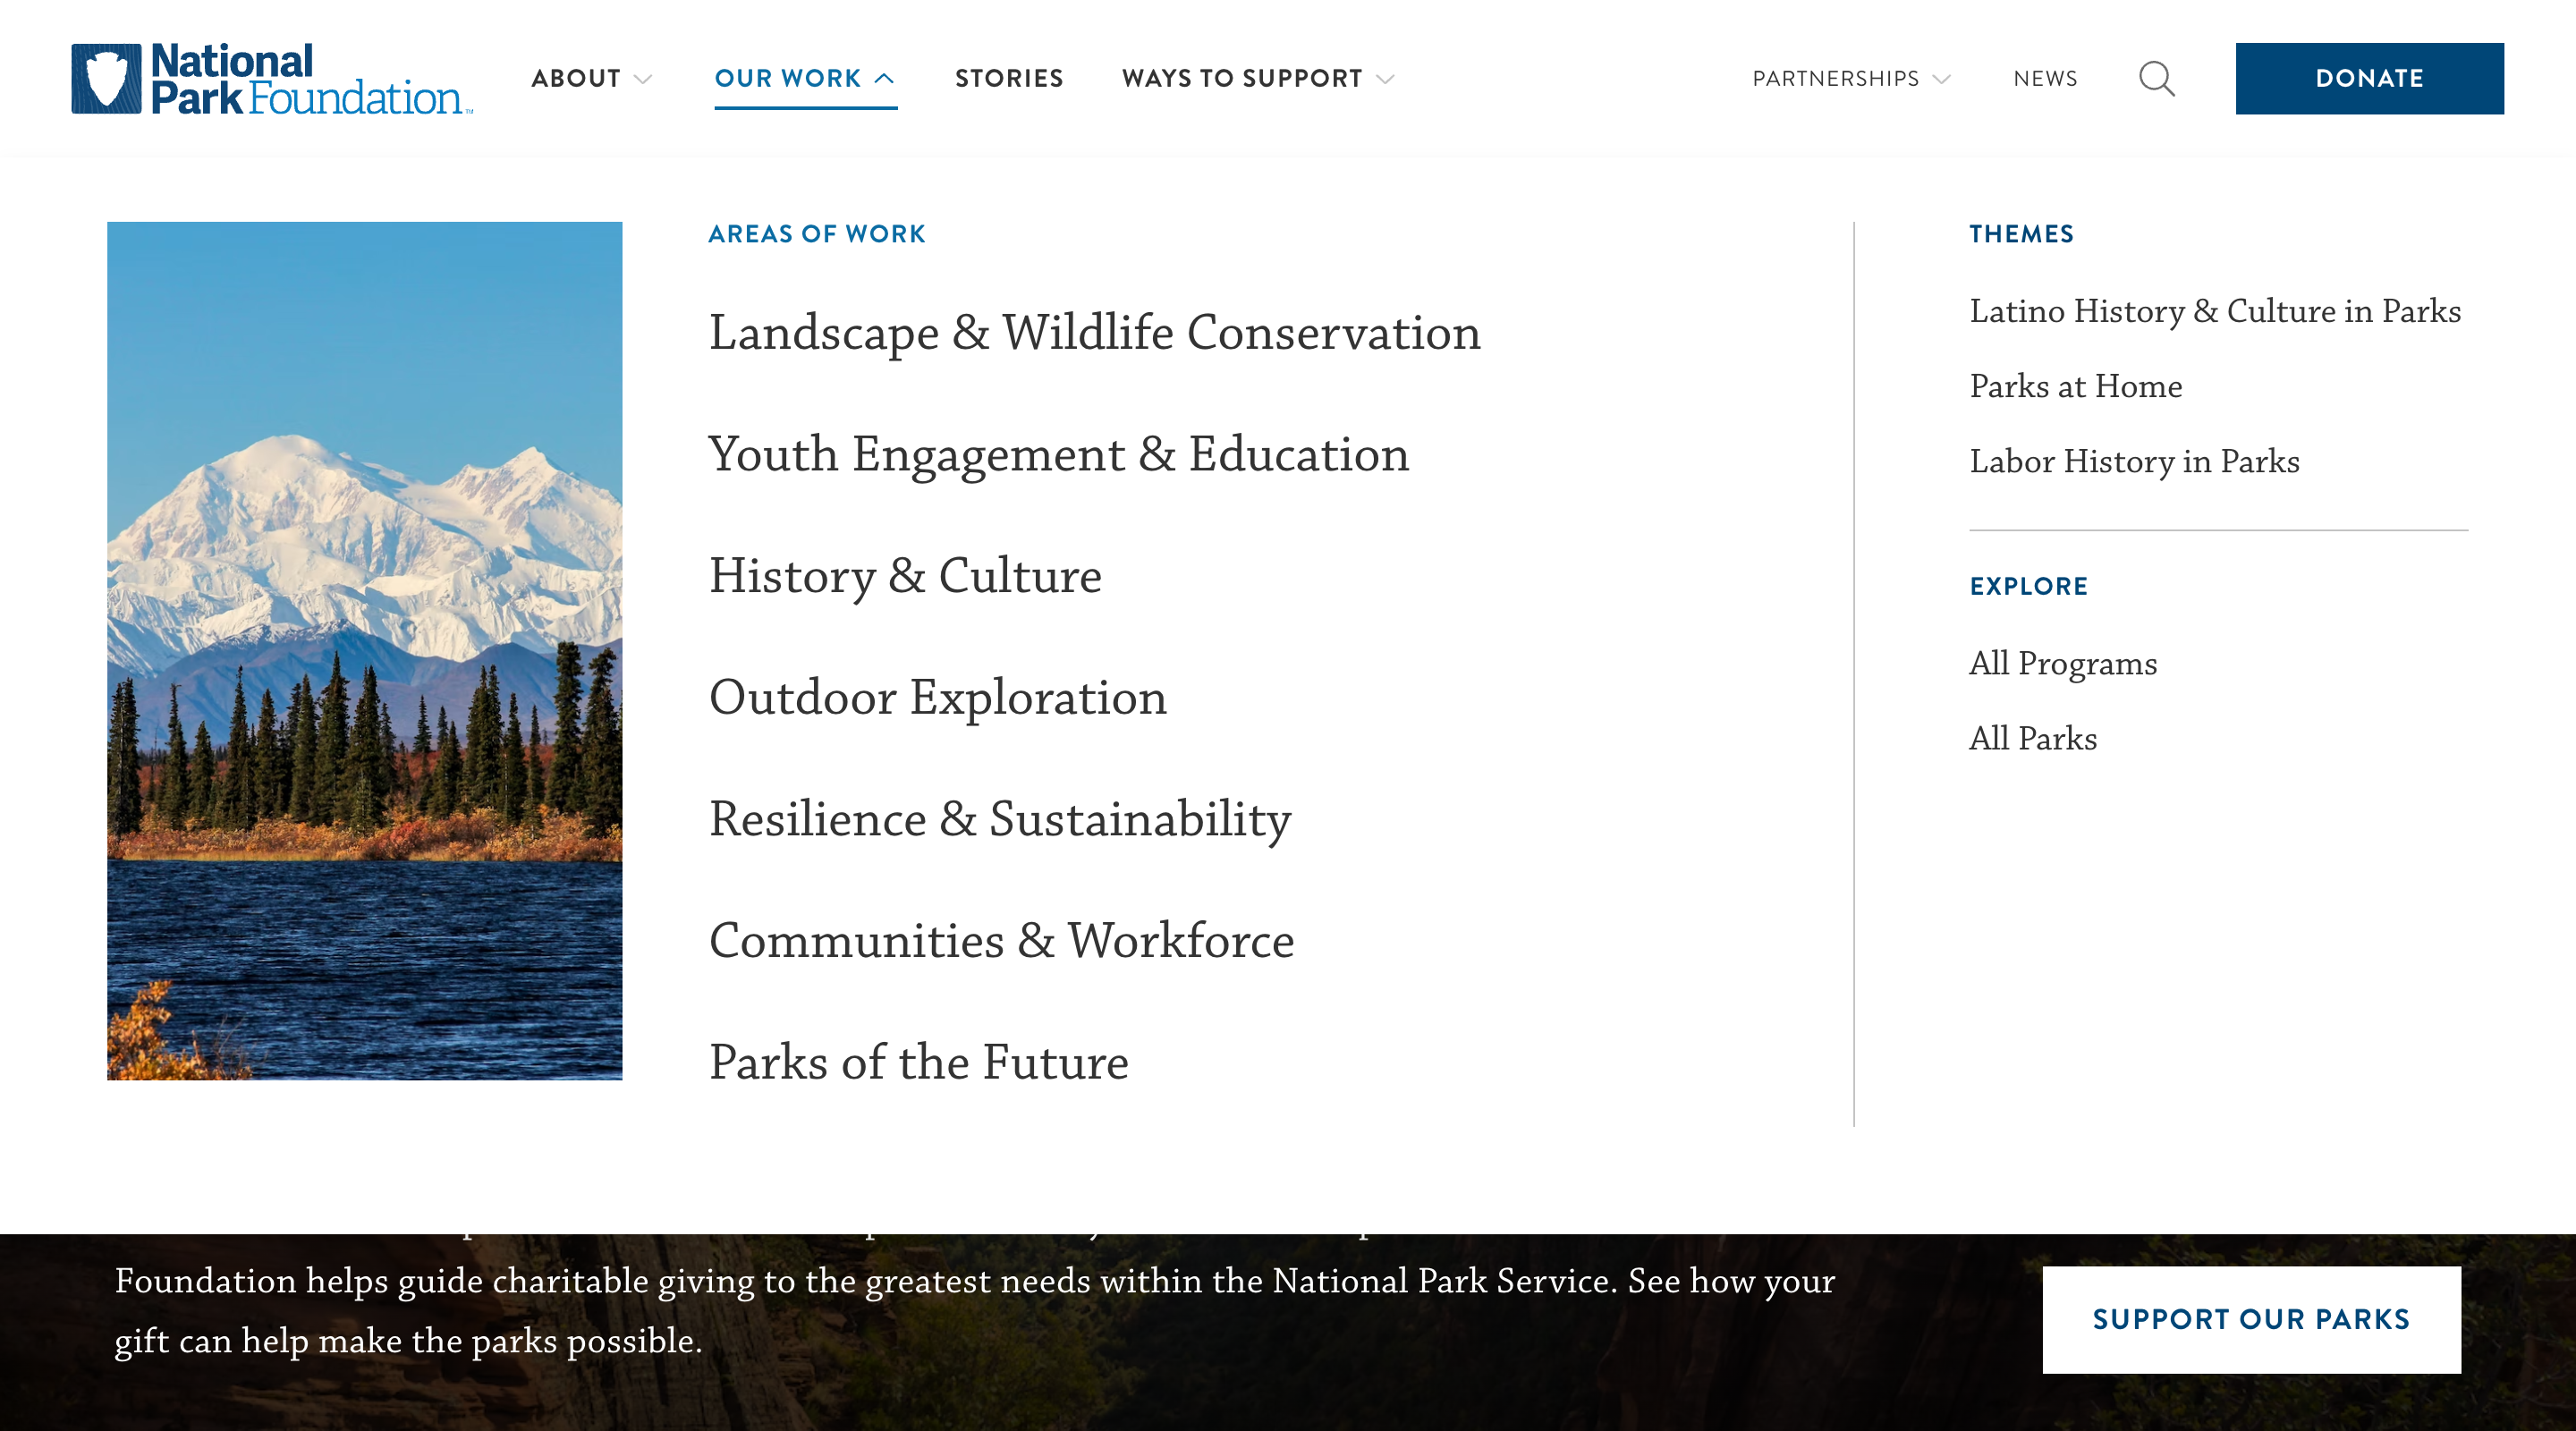 Screenshot of the National Park Foundation 'Our Work' navigation popover. The popover sits on top of the site content, covering most of the visible area of the screen. A photograph of mountains is on the left of the screen with a list of pages beside it. There are additional smaller secondary links on the right side of the screen.